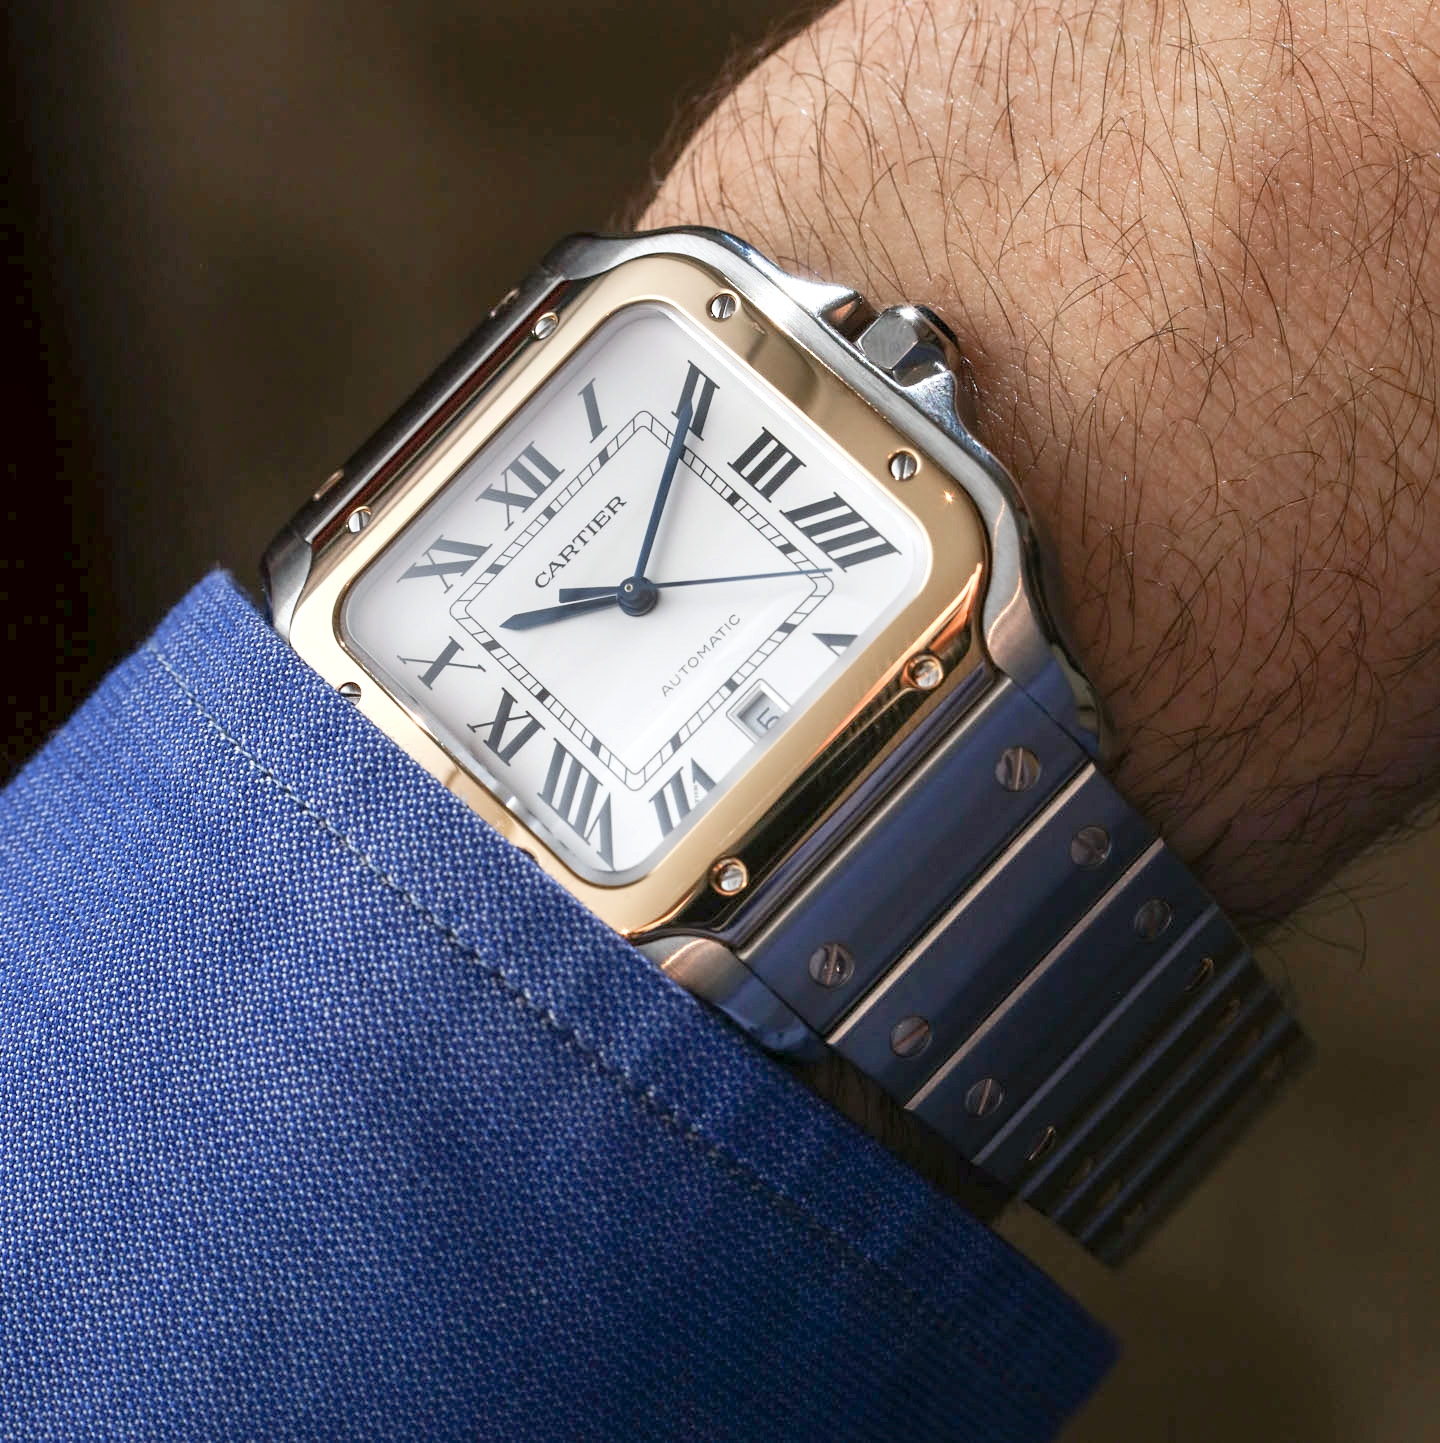 Cartier Santos Watches For 2018 Will Be 